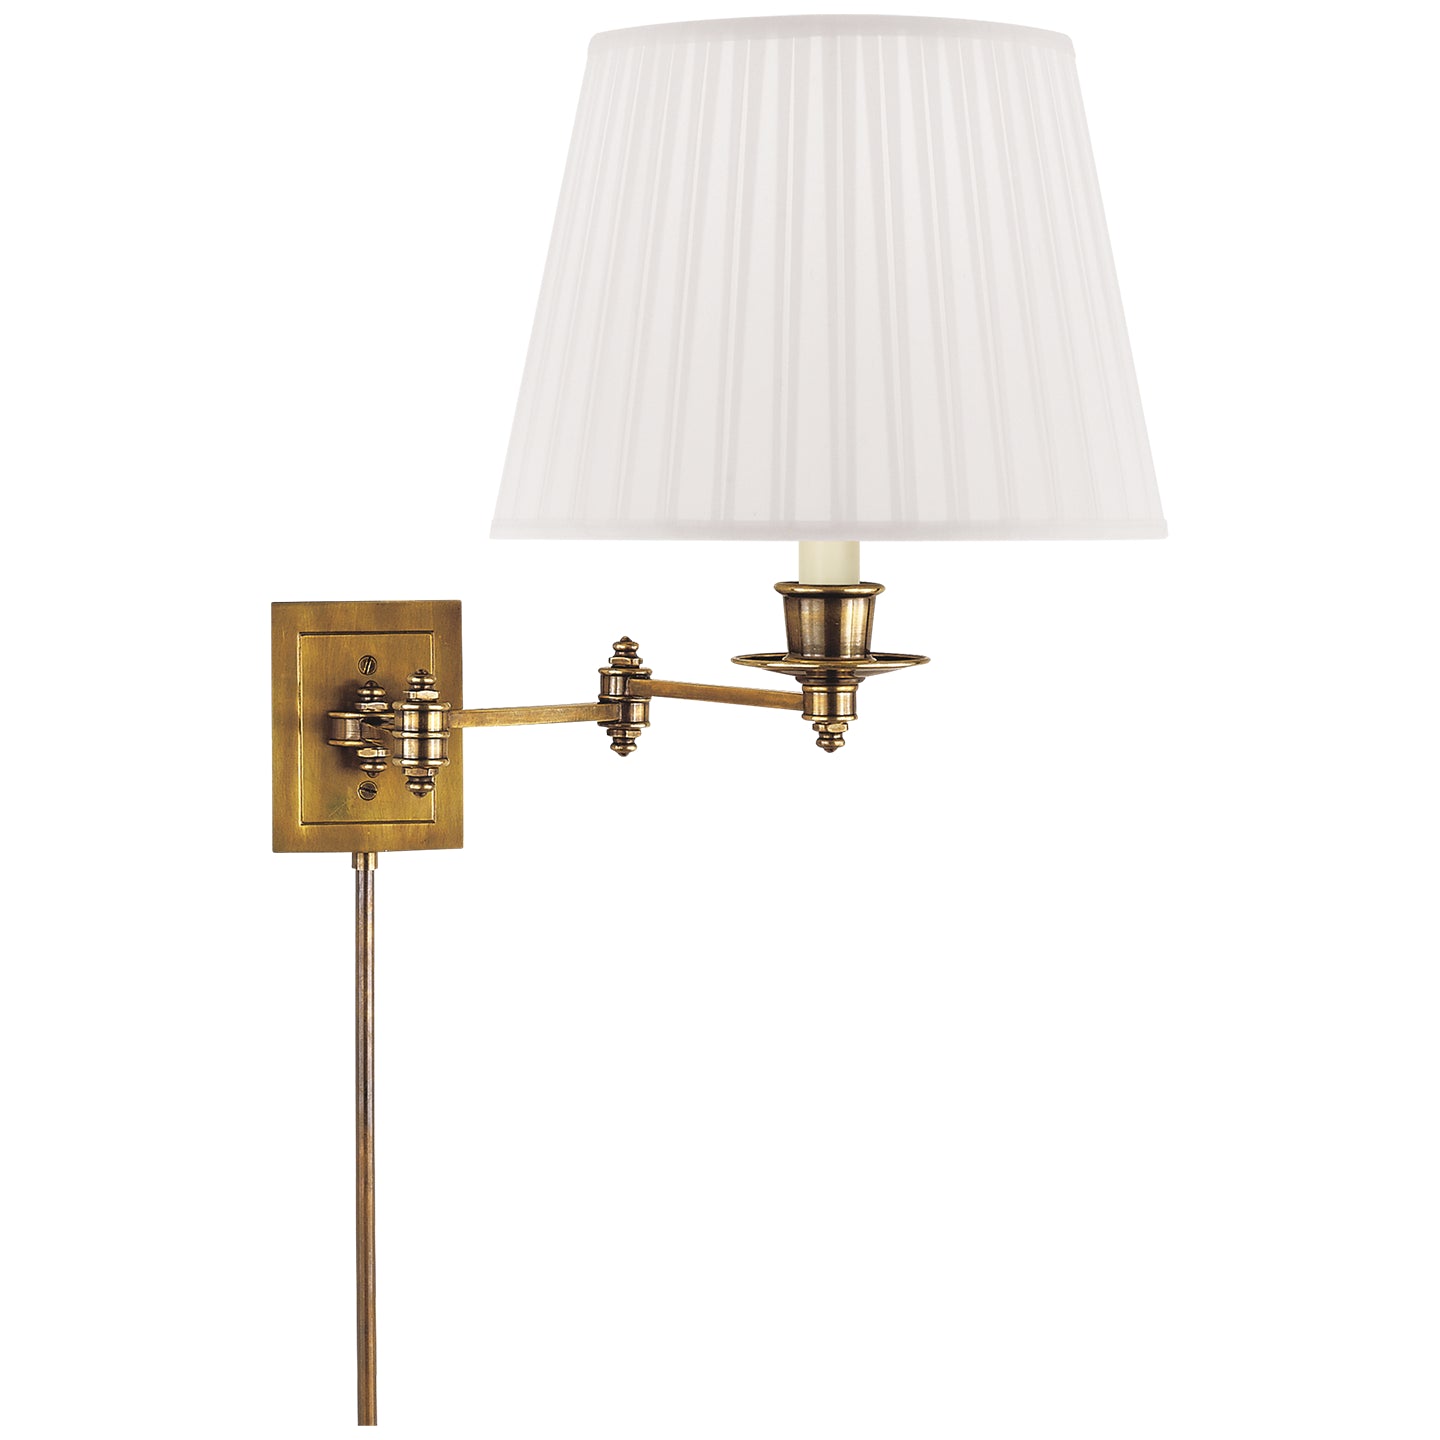 Load image into Gallery viewer, Visual Comfort Signature - S 2000HAB-S - One Light Swing Arm Wall Lamp - Swing Arm Sconce - Hand-Rubbed Antique Brass
